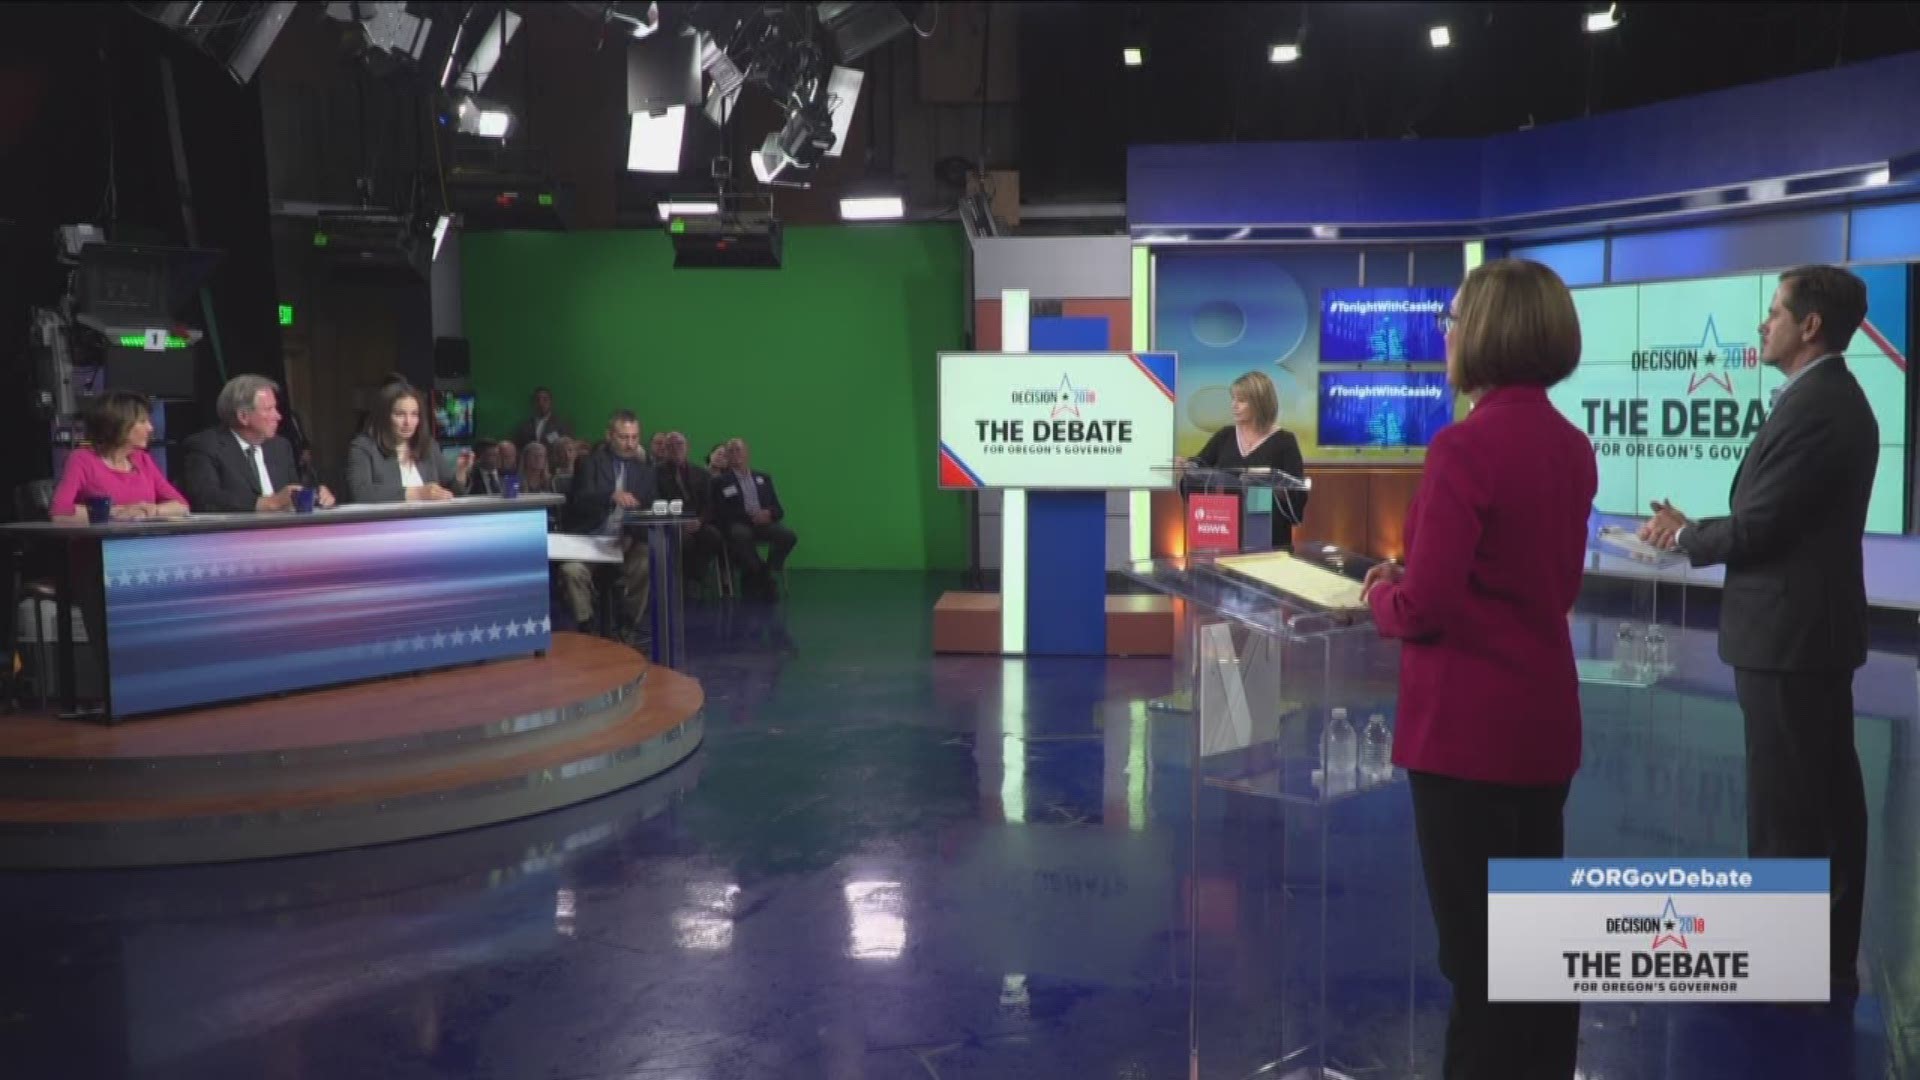 The final debate between Kate Brown and Knute Buehler came as the governor's race appeared to be a close contest. A new poll showed Brown with a slight lead over Buehler, 49 to 45 percent: https://on.kgw.com/orgovpoll